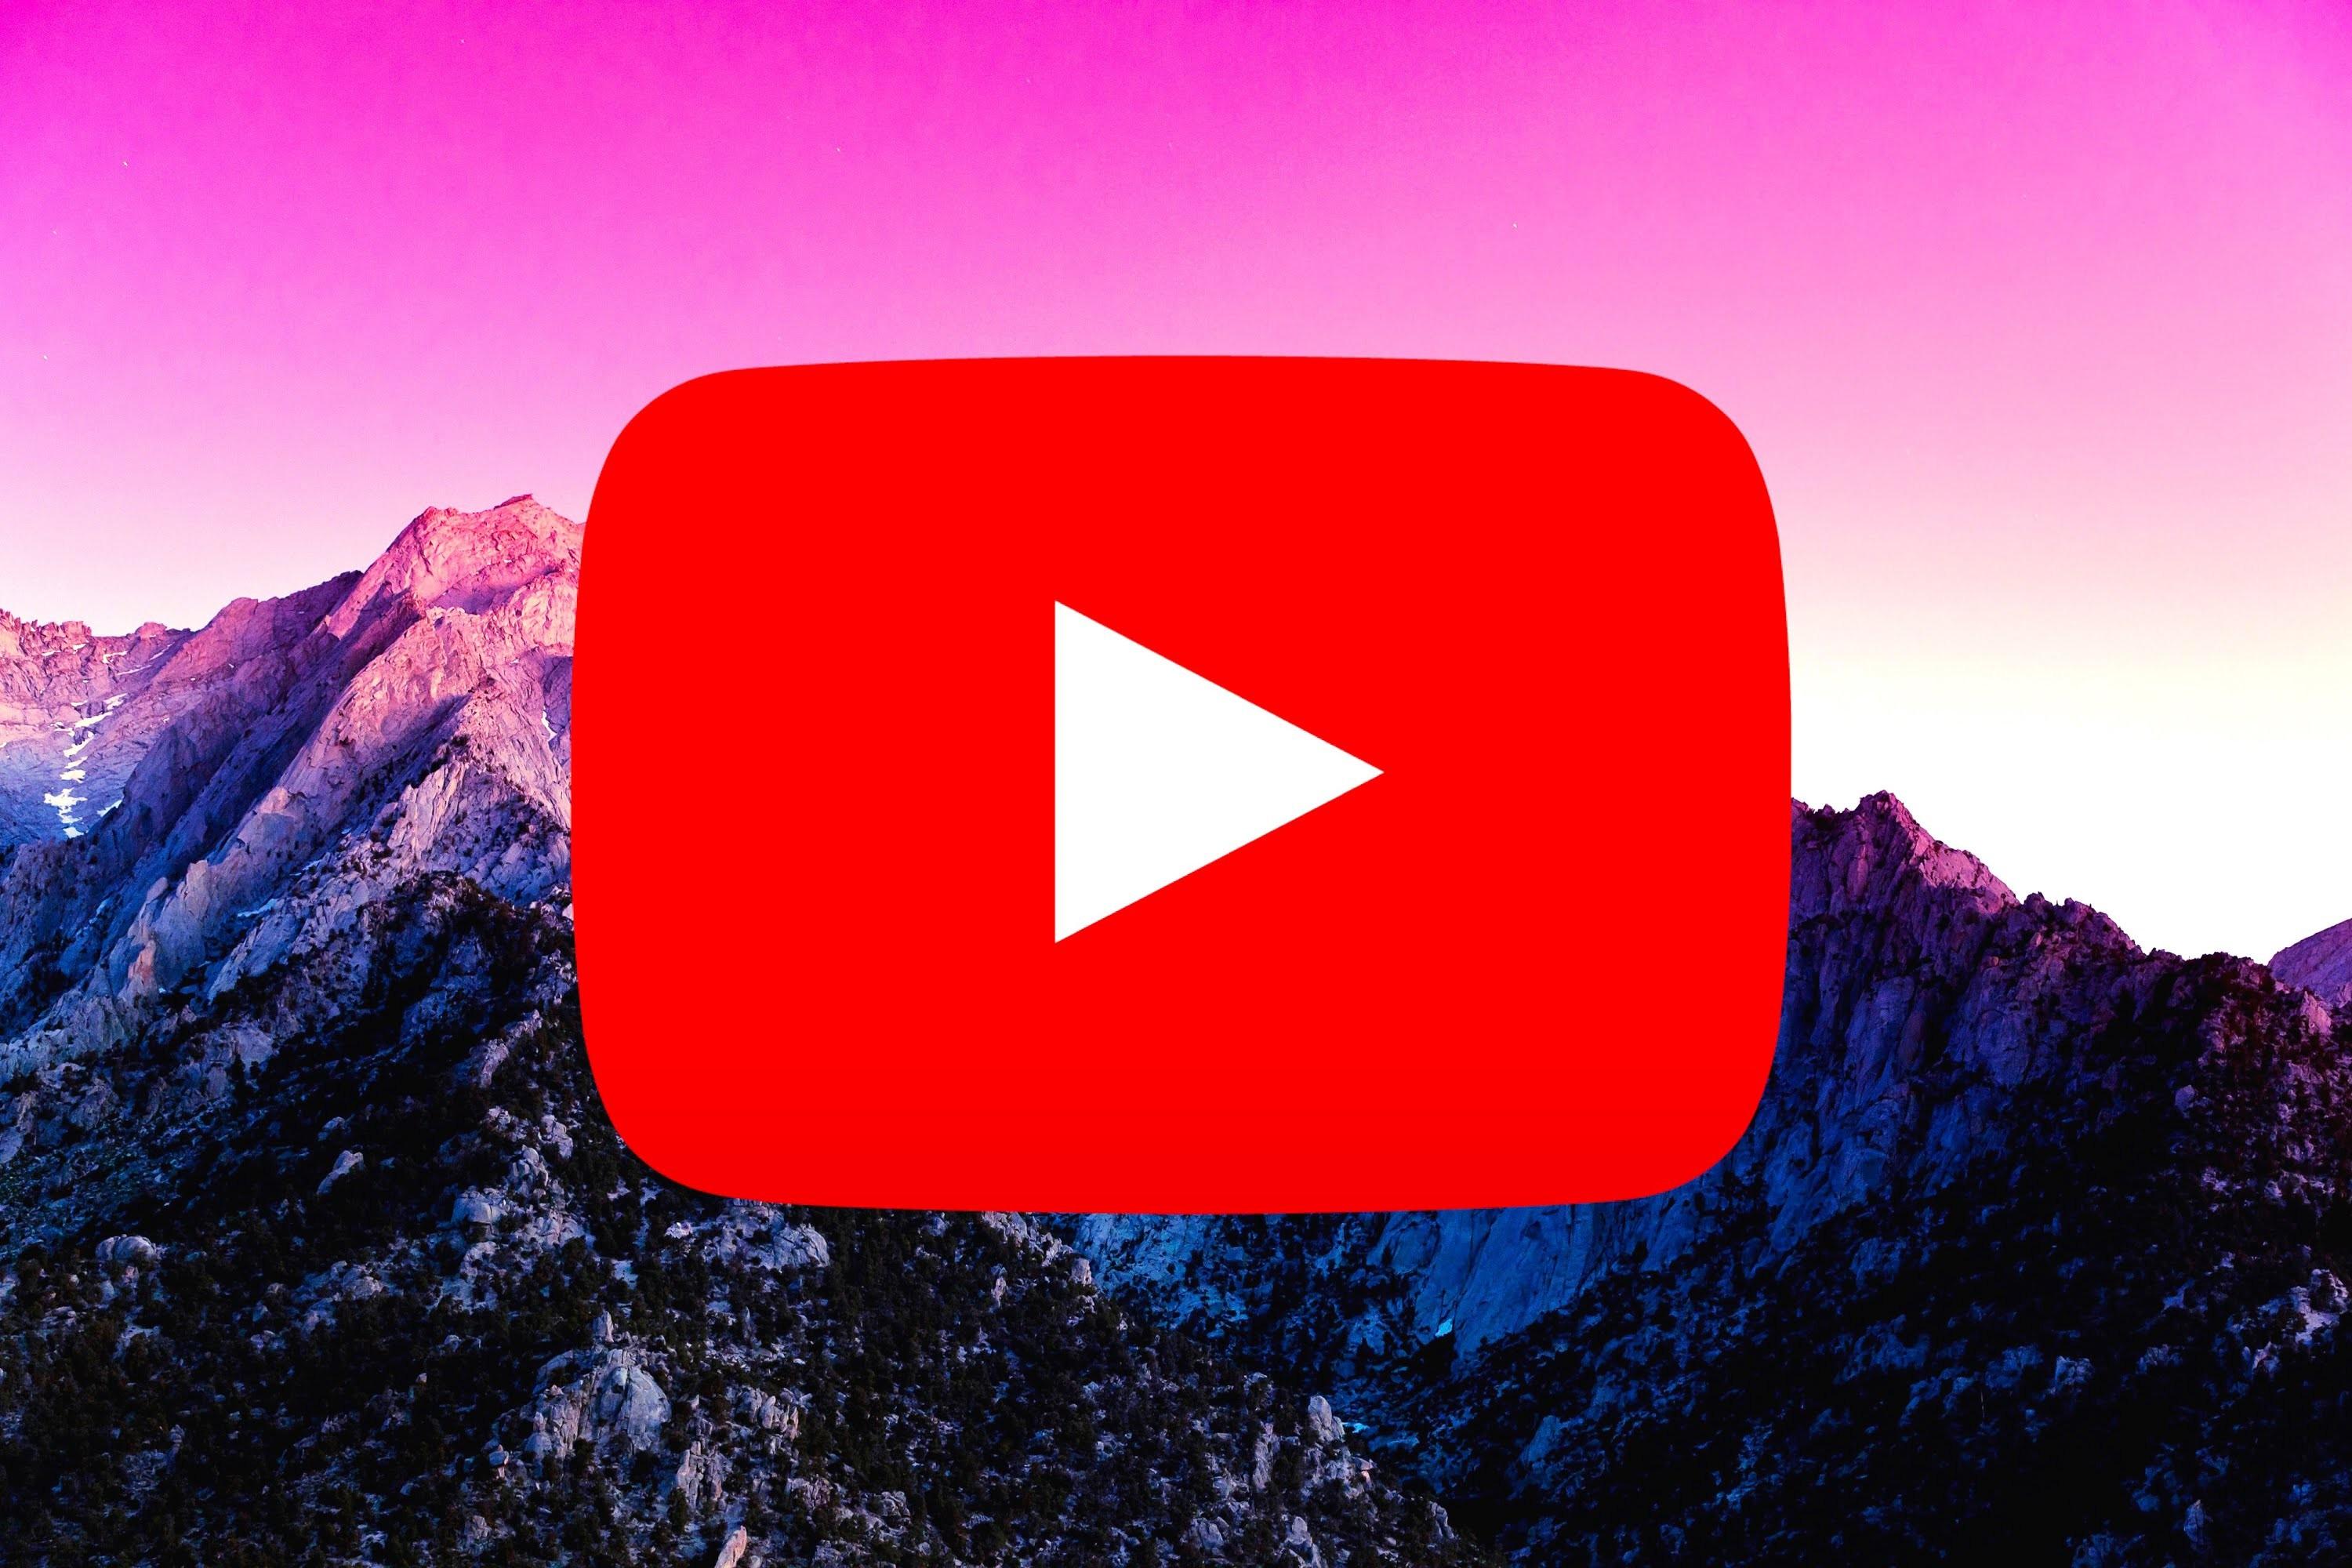 Youtube Wallpapers